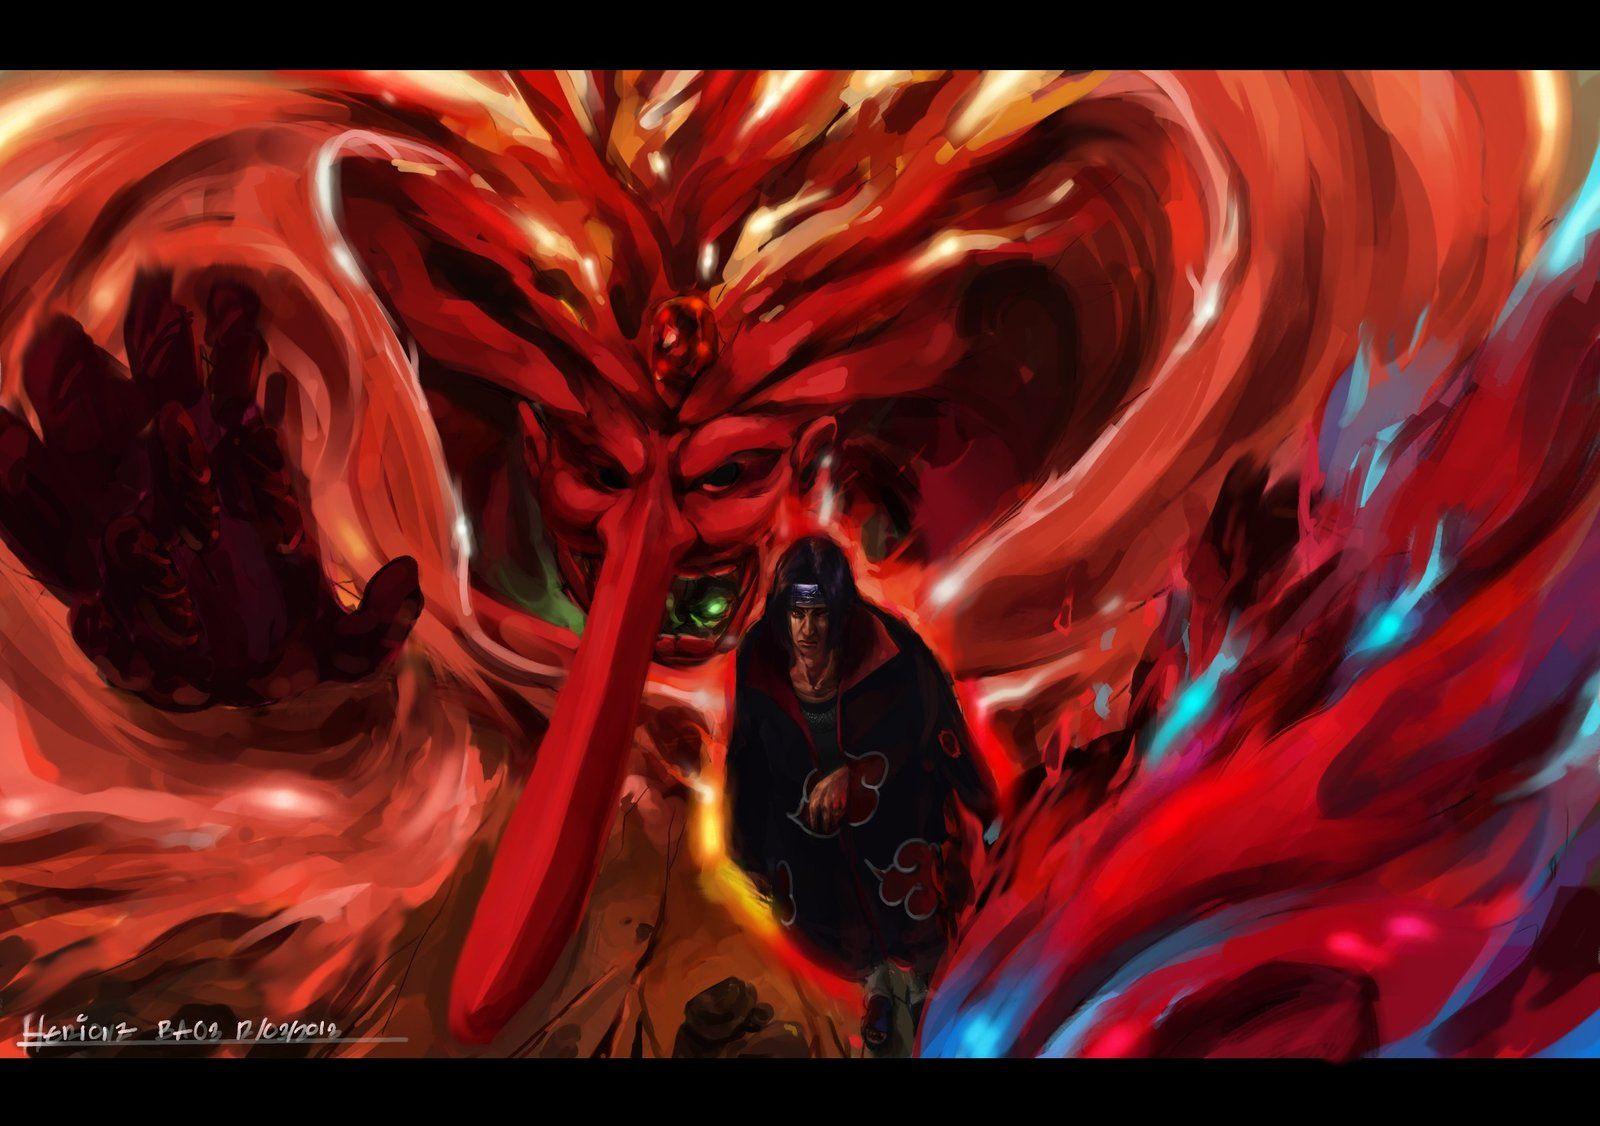 BA03 March 12 Itachi and Susano by herionz.